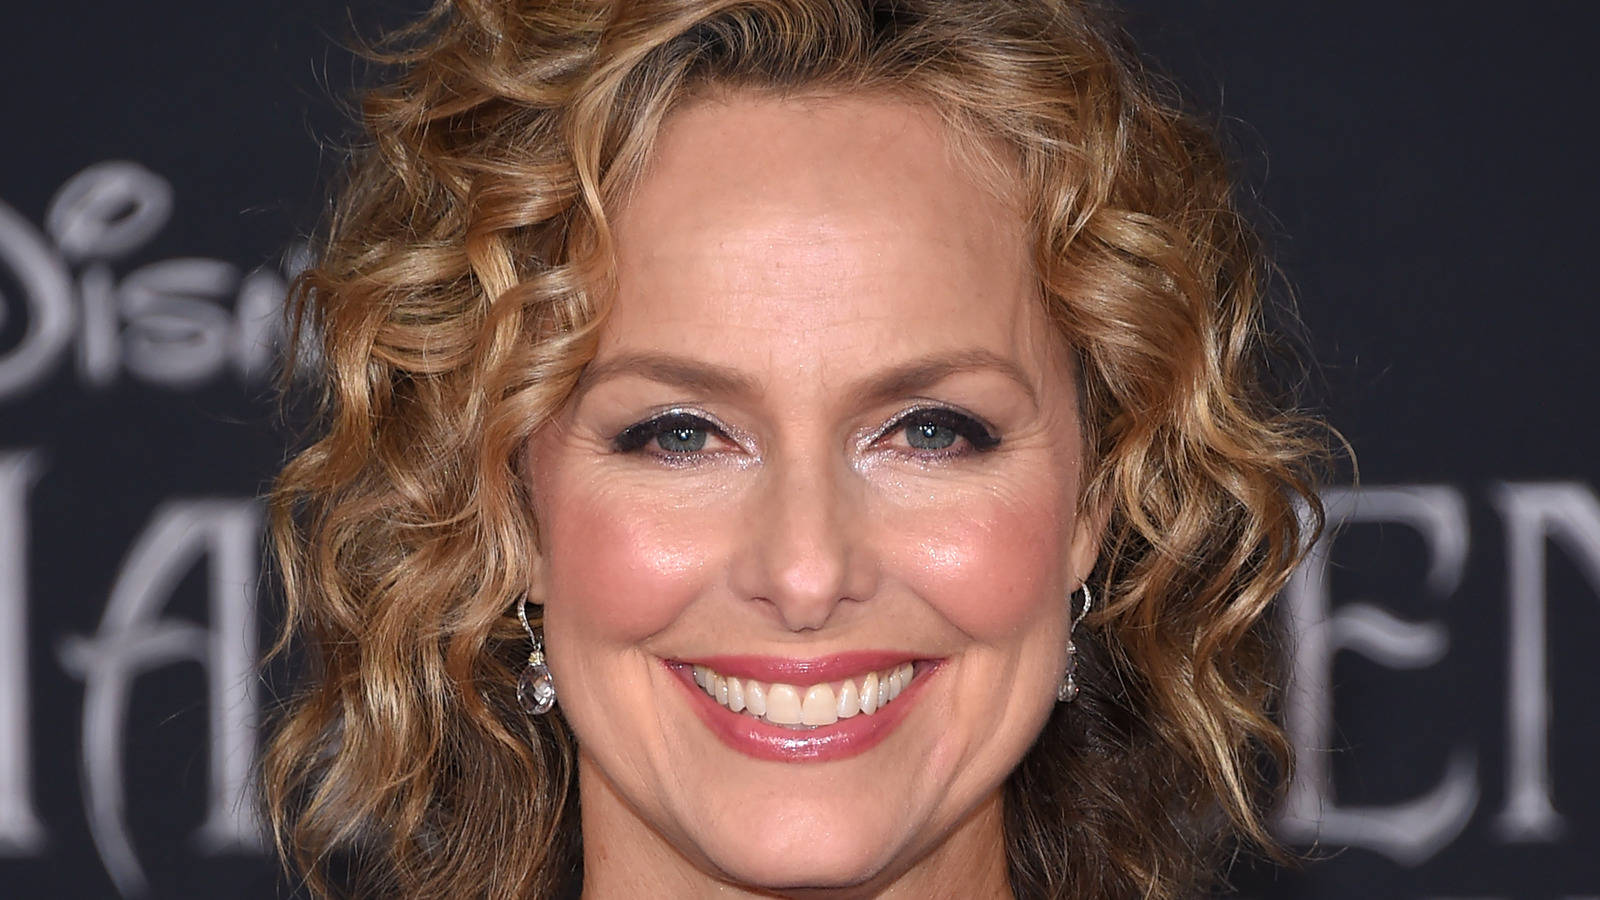 Melora Hardin In The 2019 Maleficent: Mistress Of Evil Premiere Background